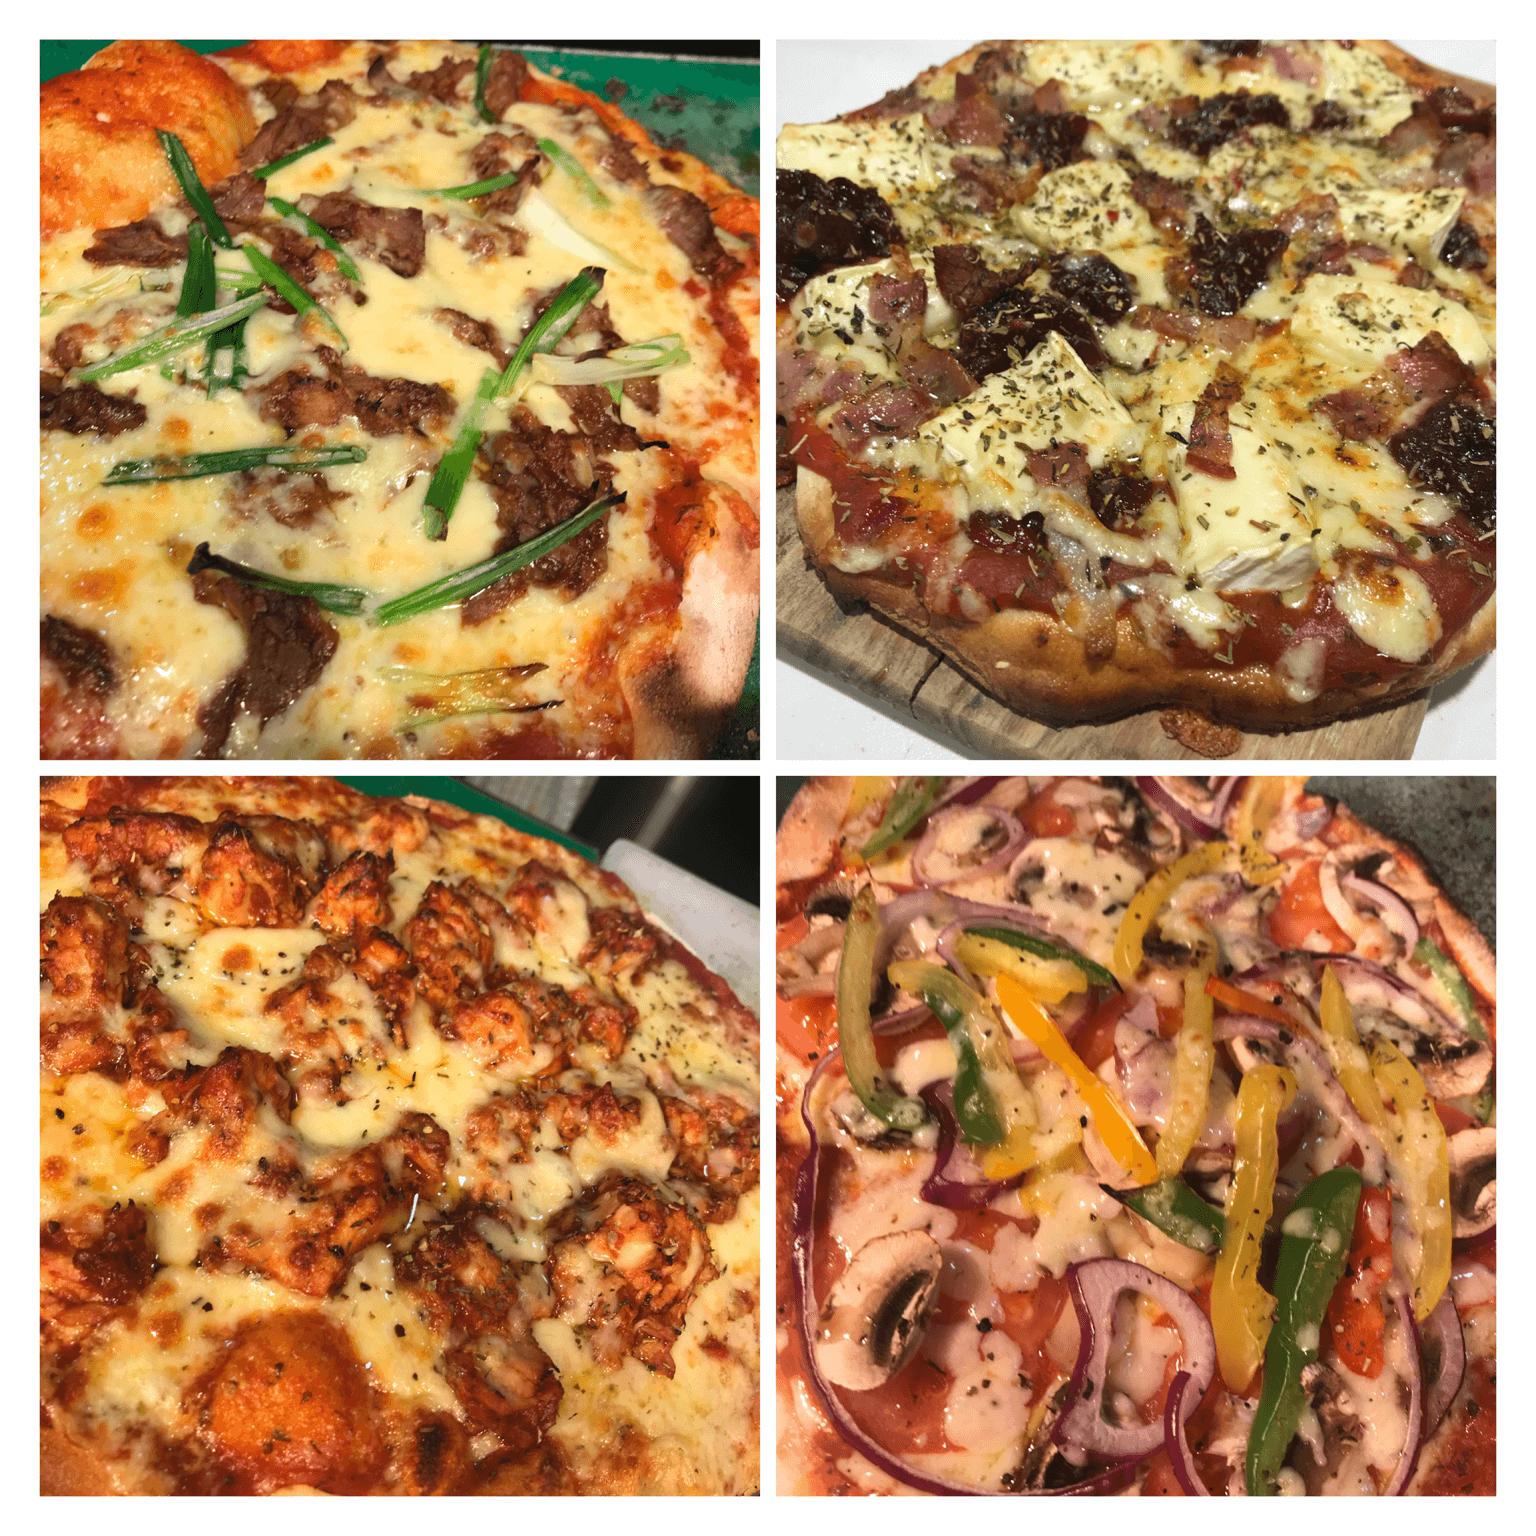 11th August Pizza Friday 5pm – 7pm